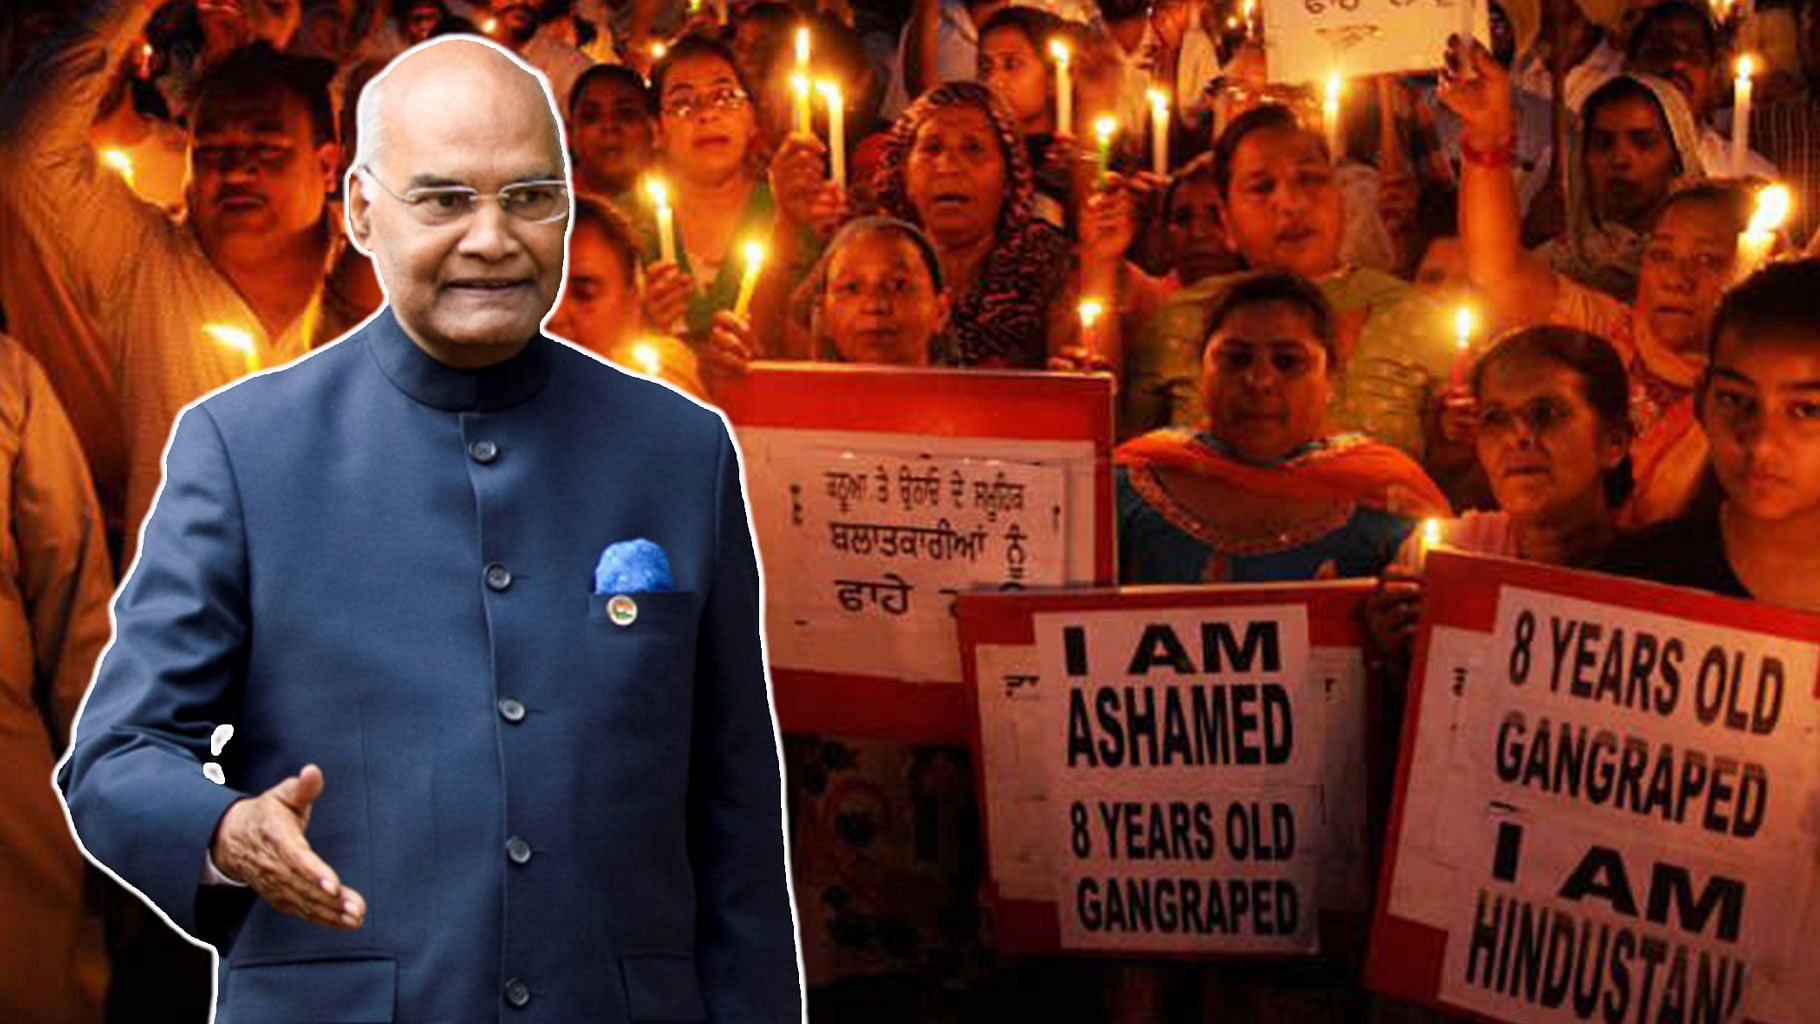 President of India Ram Nath Kovind while speaking at an event on Friday, 6 December, said rape convicts under POCSO Act should not have right to file mercy petition.